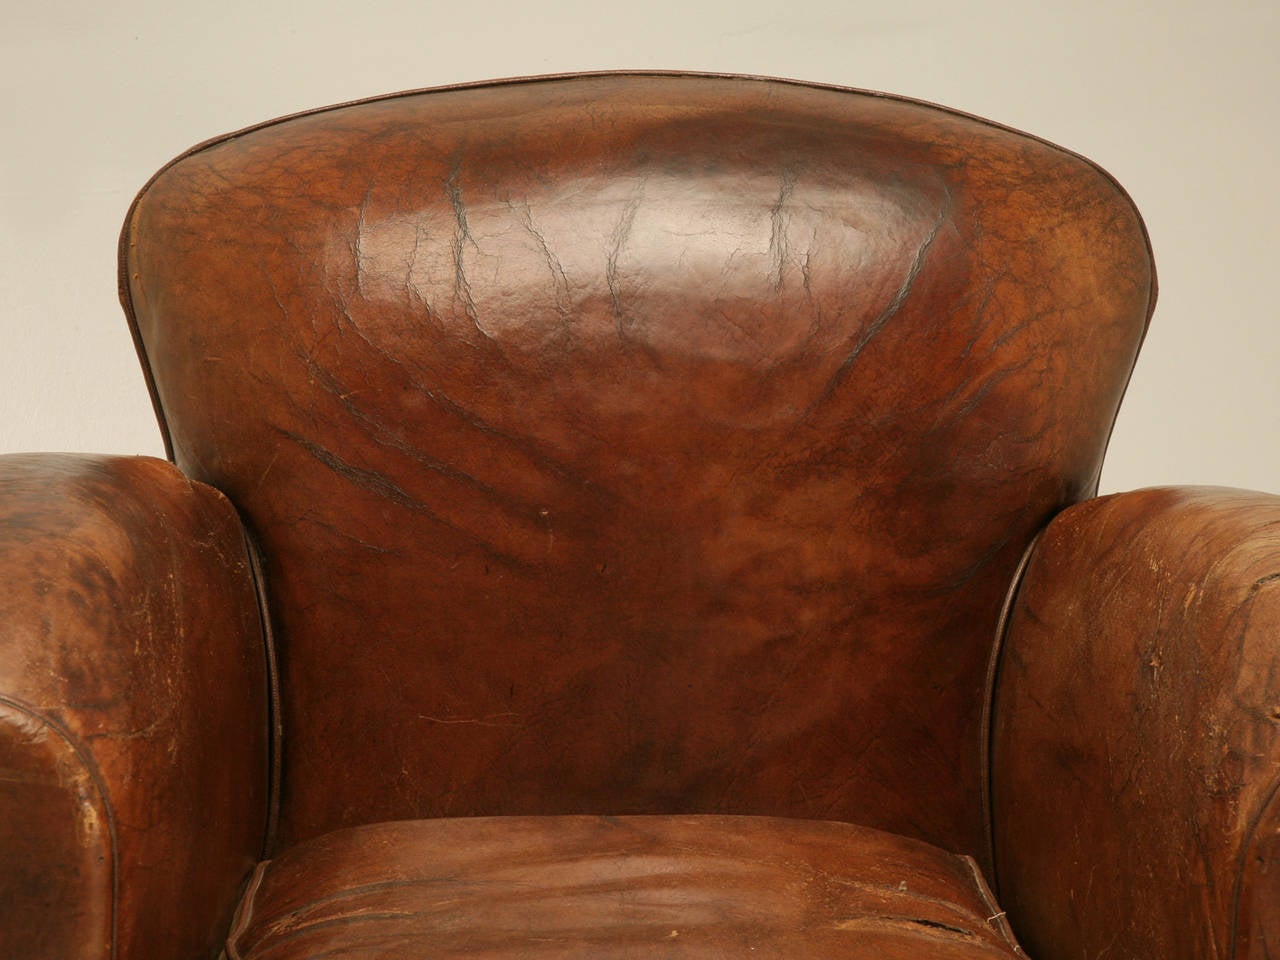 c1930's French Art Deco club chairs in a best described as 